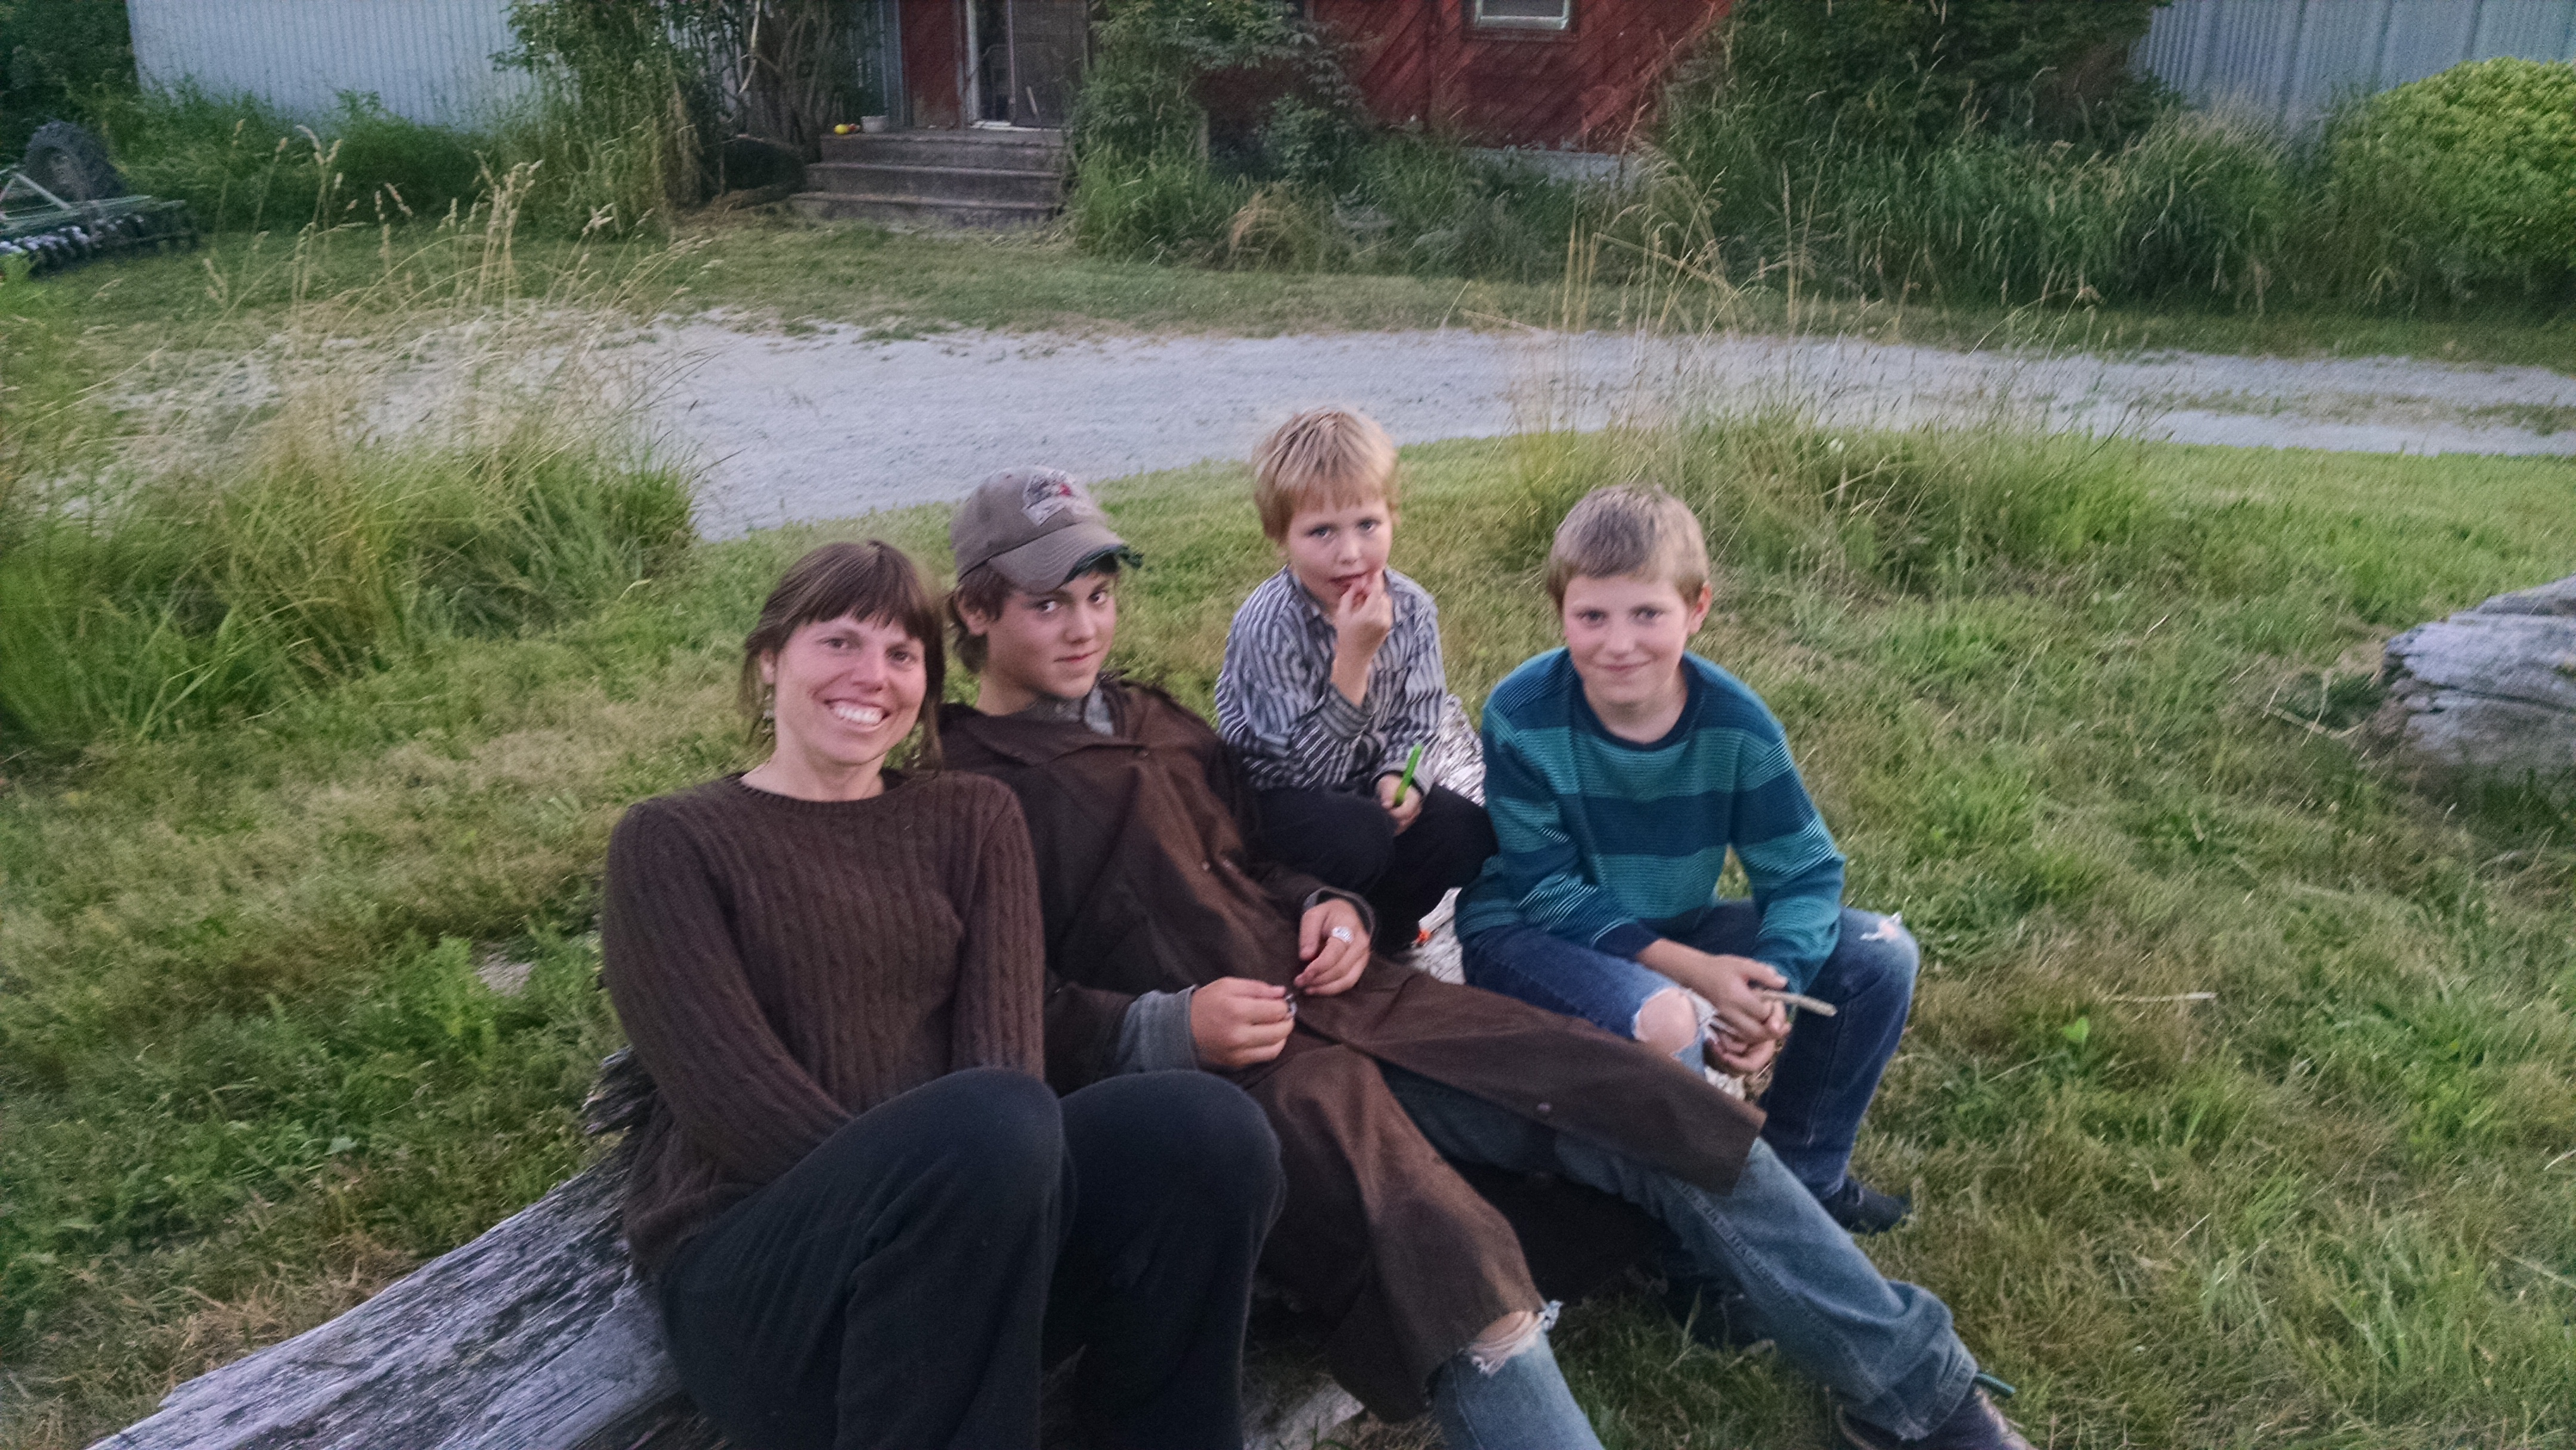 Danielle and three boys sitting on a log, smiling up at the camera